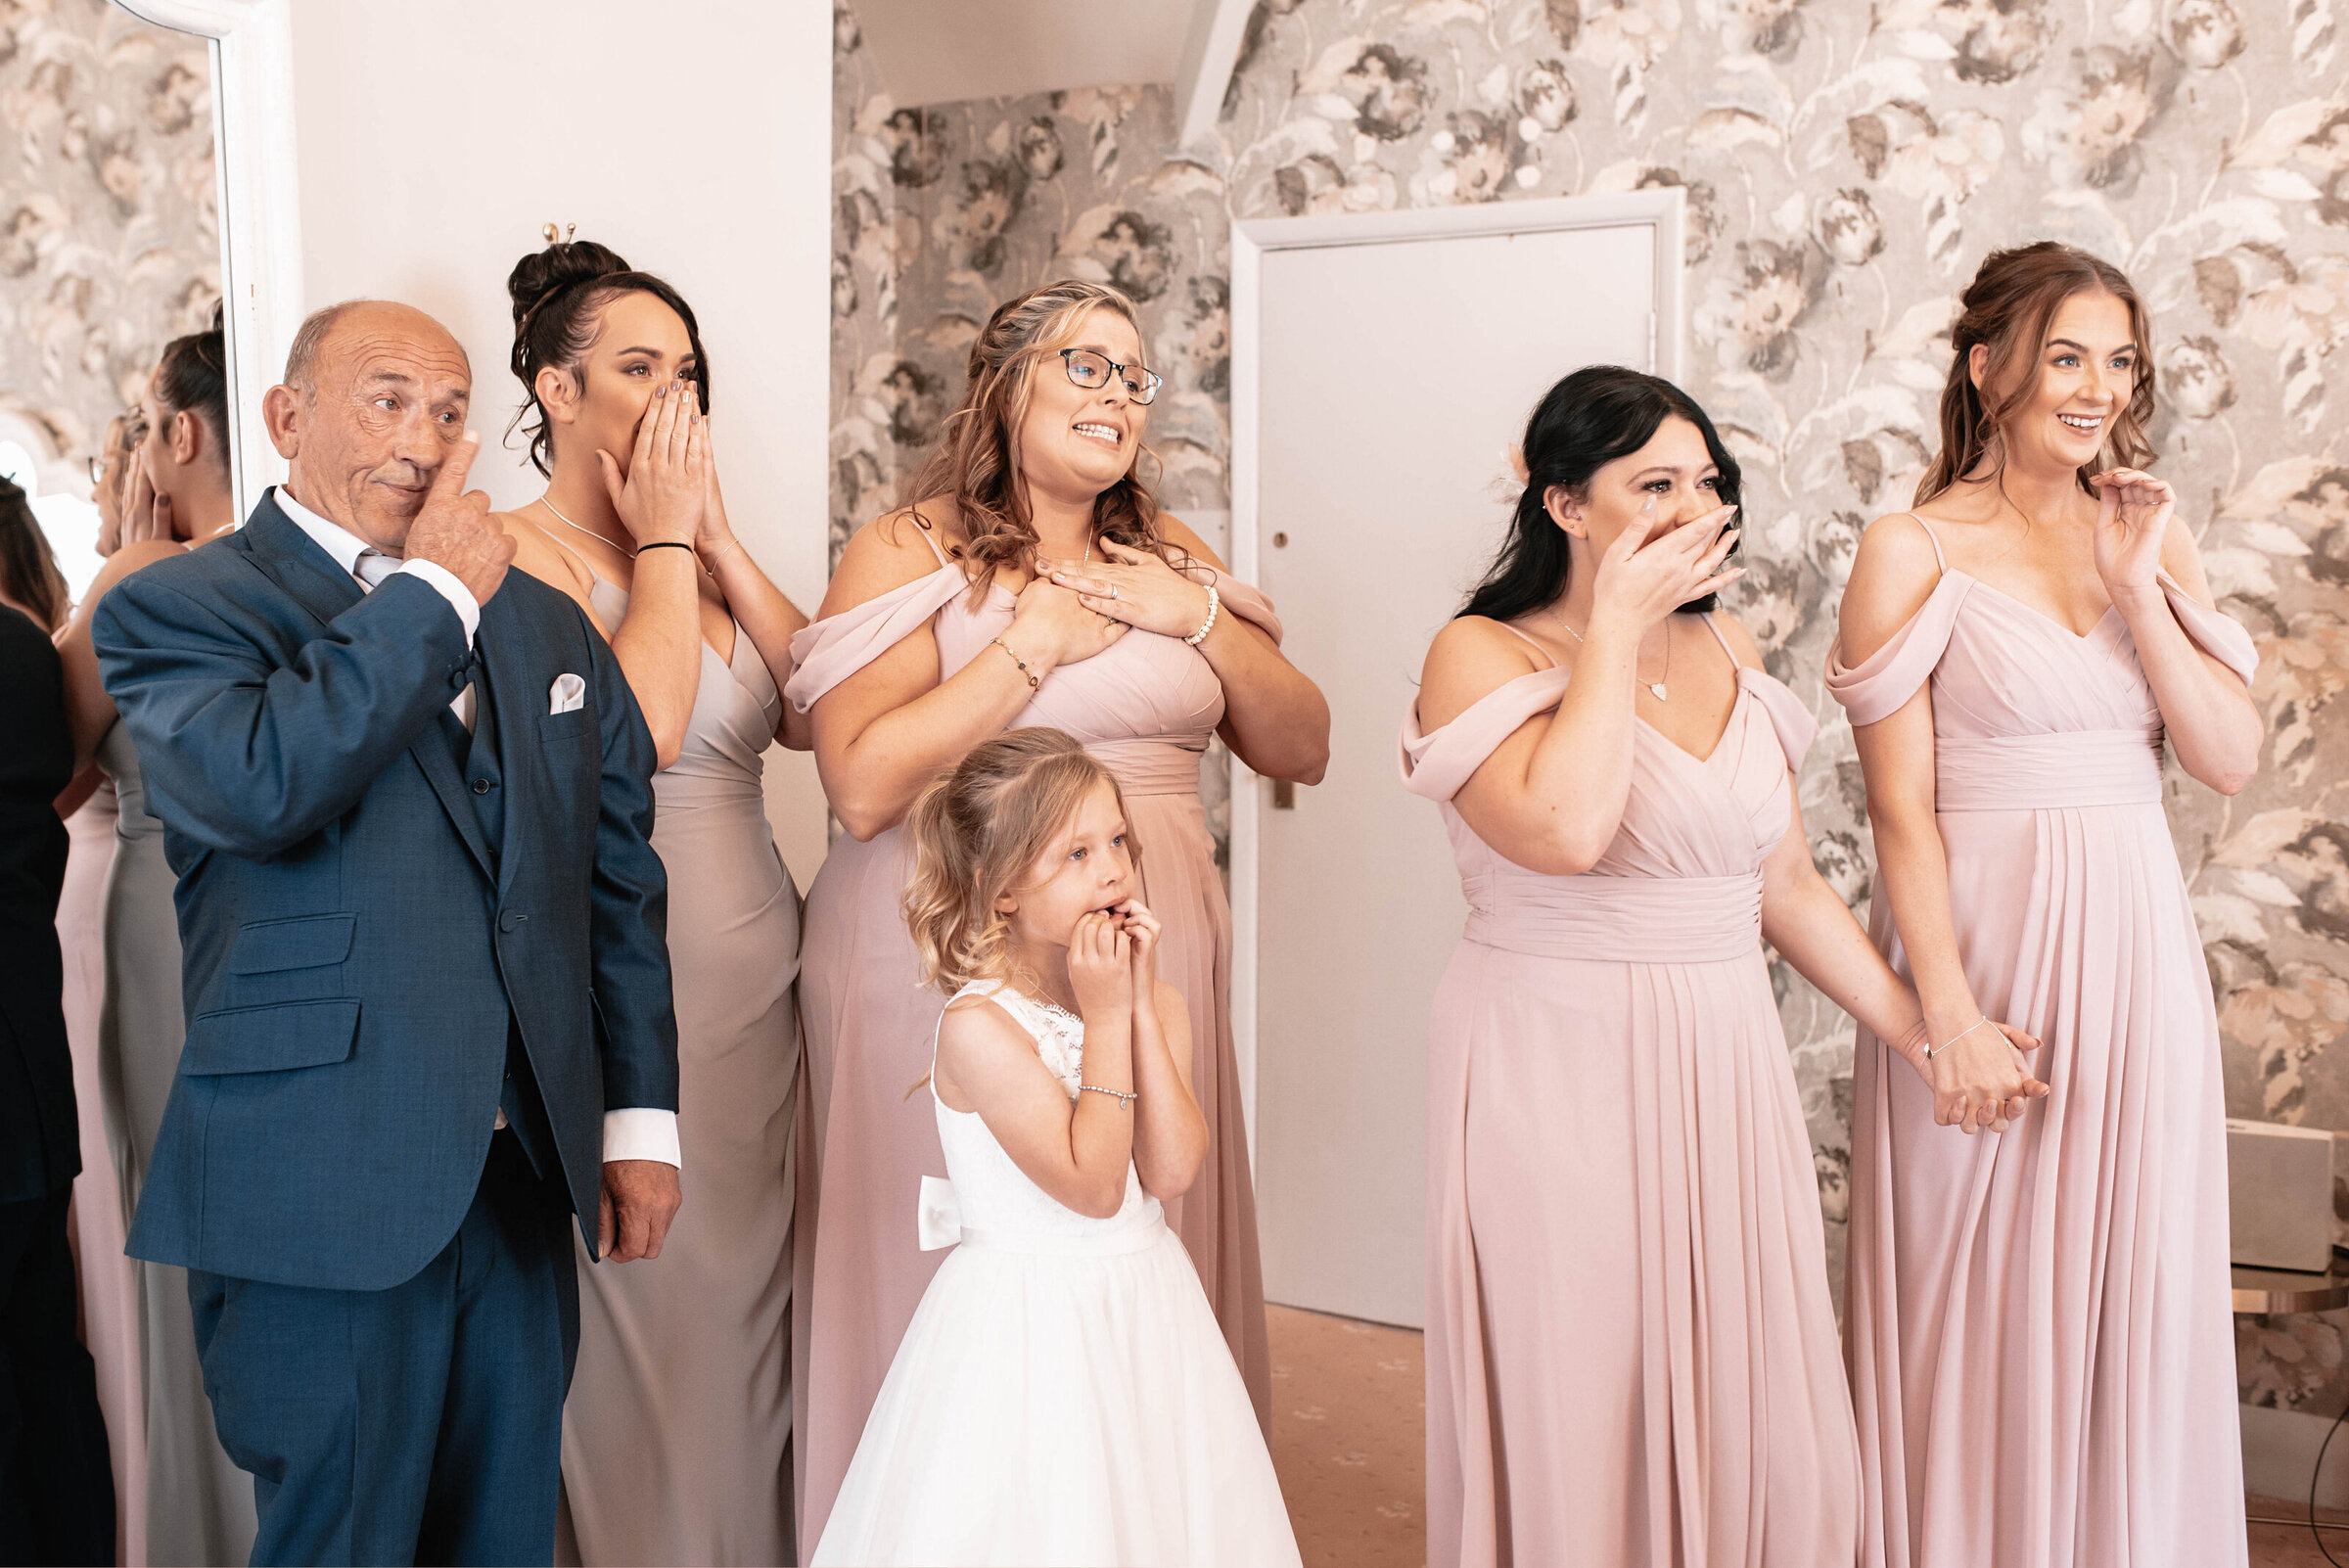 Five bridesmaids and father of the bride smiling and crying happy tears at first look of bride in her wedding dress